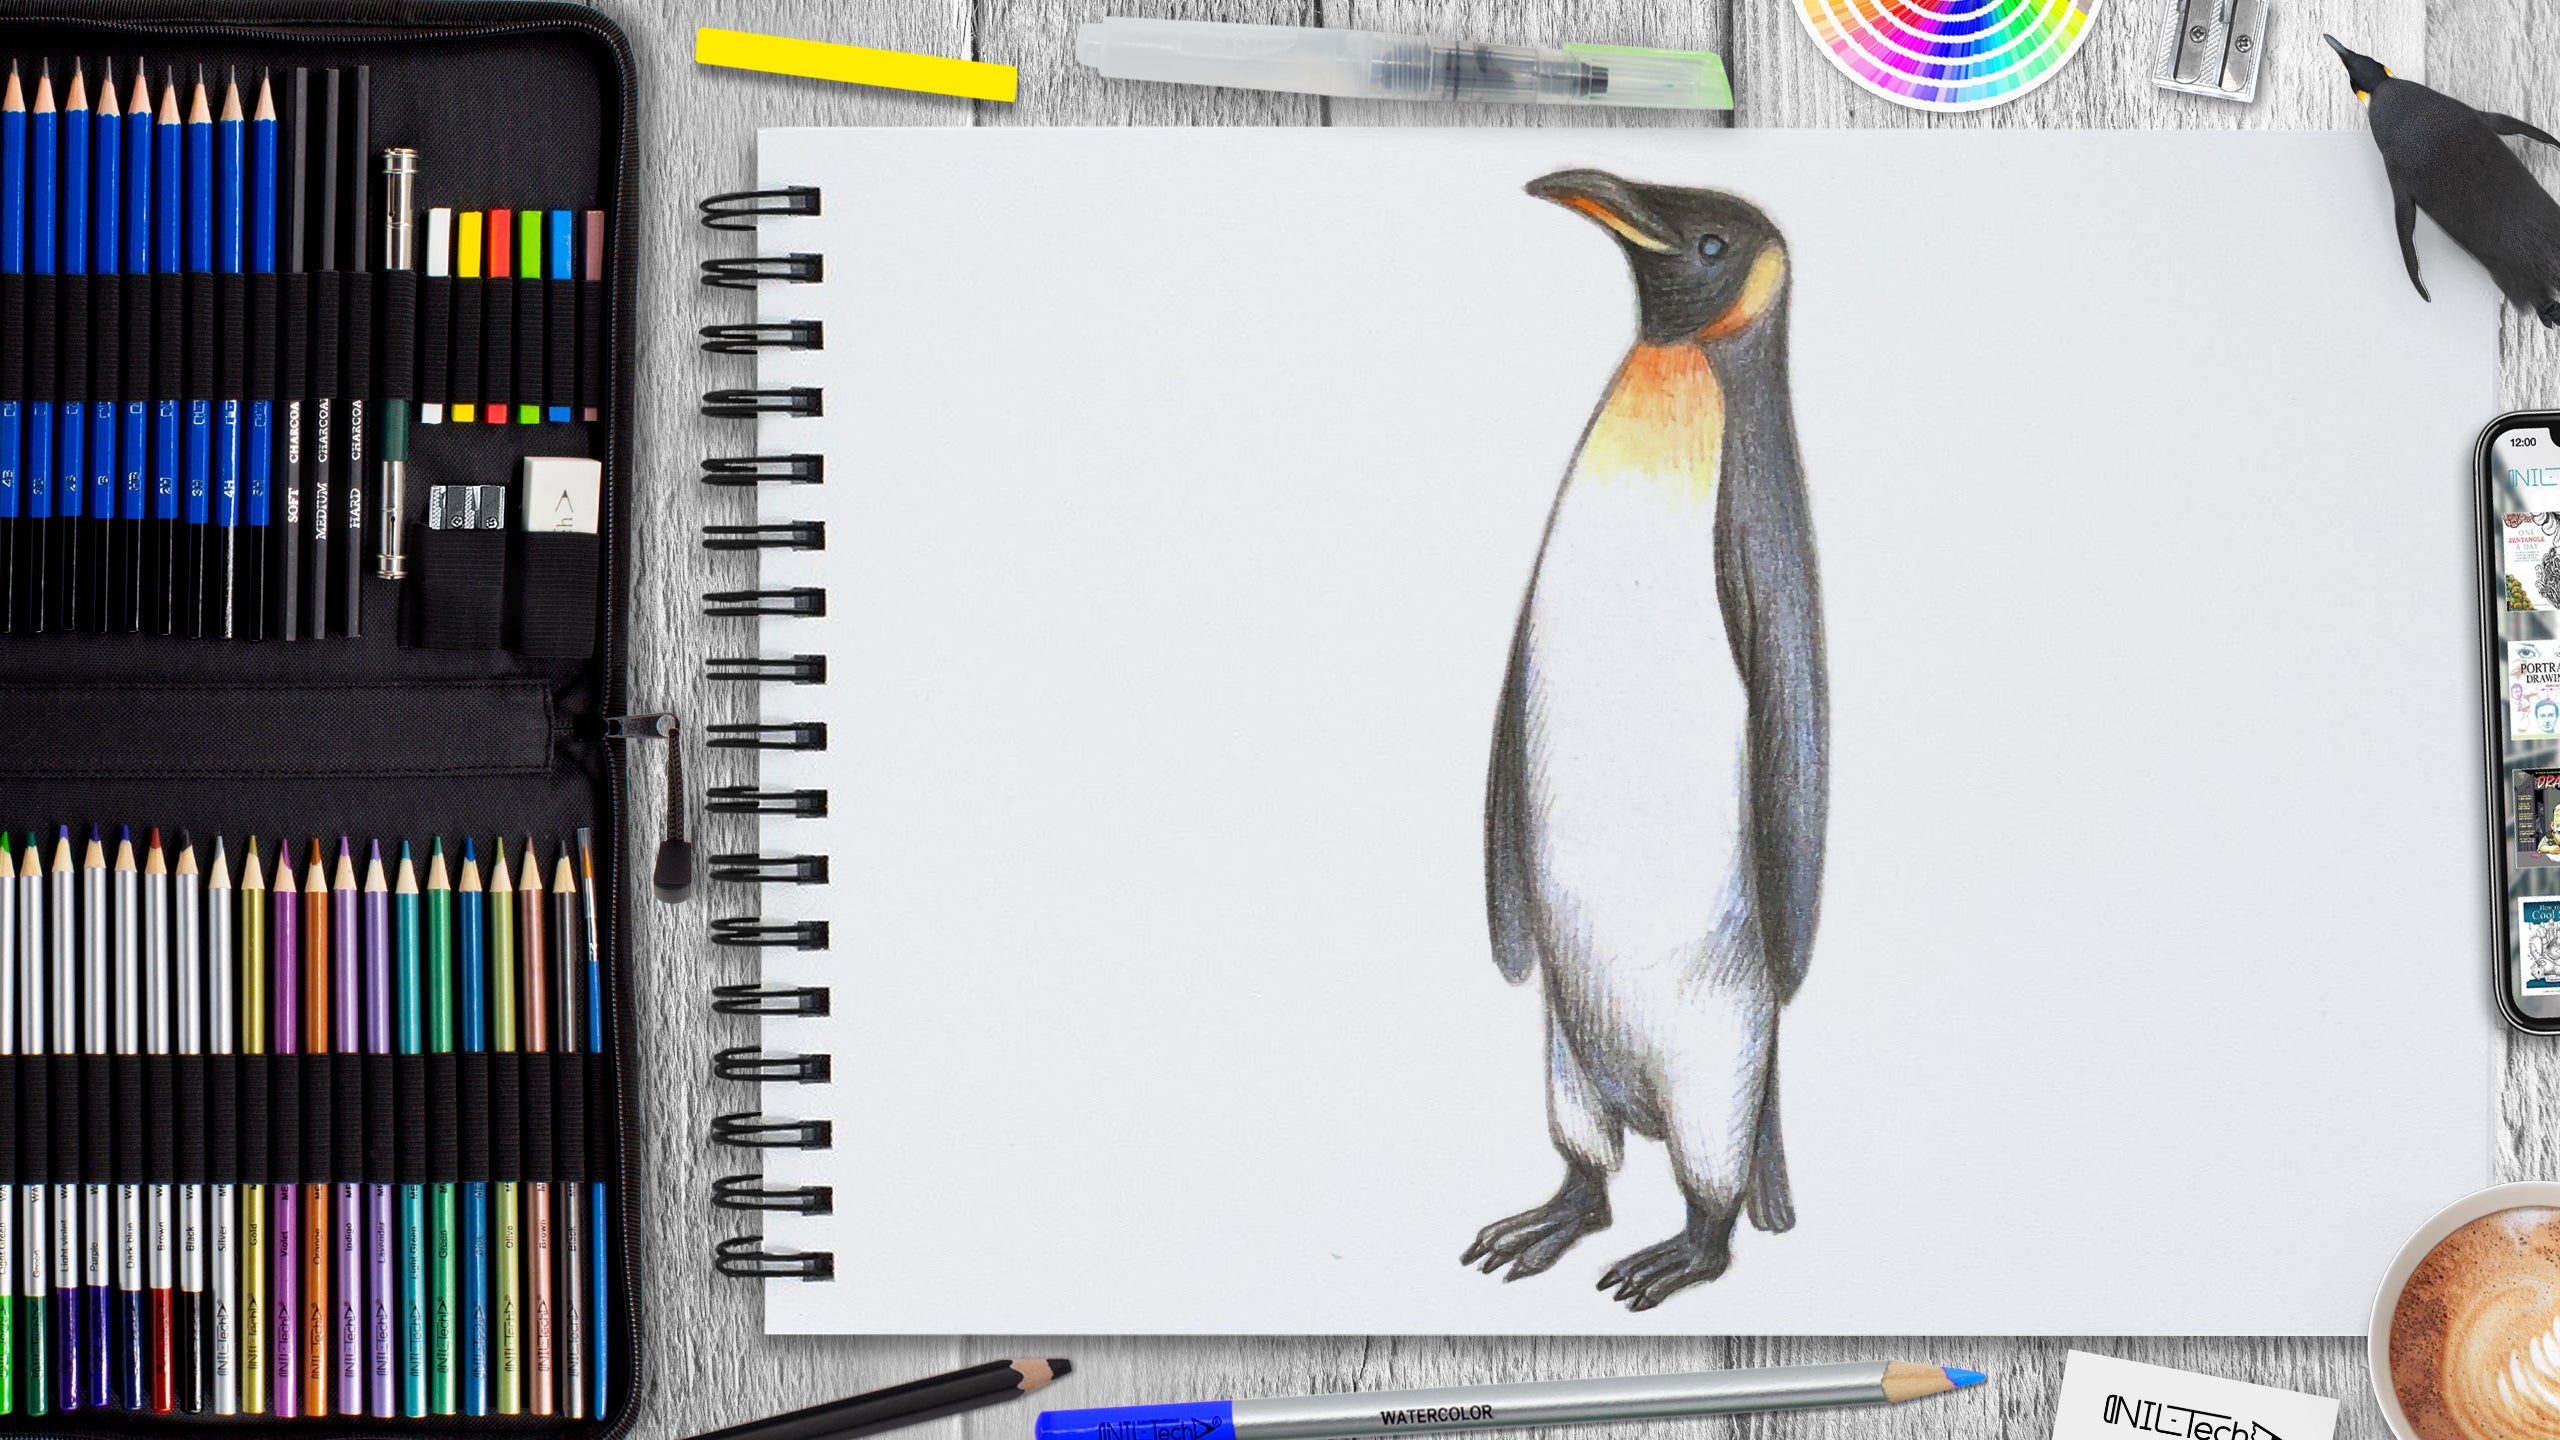 how to draw a step by step penguin